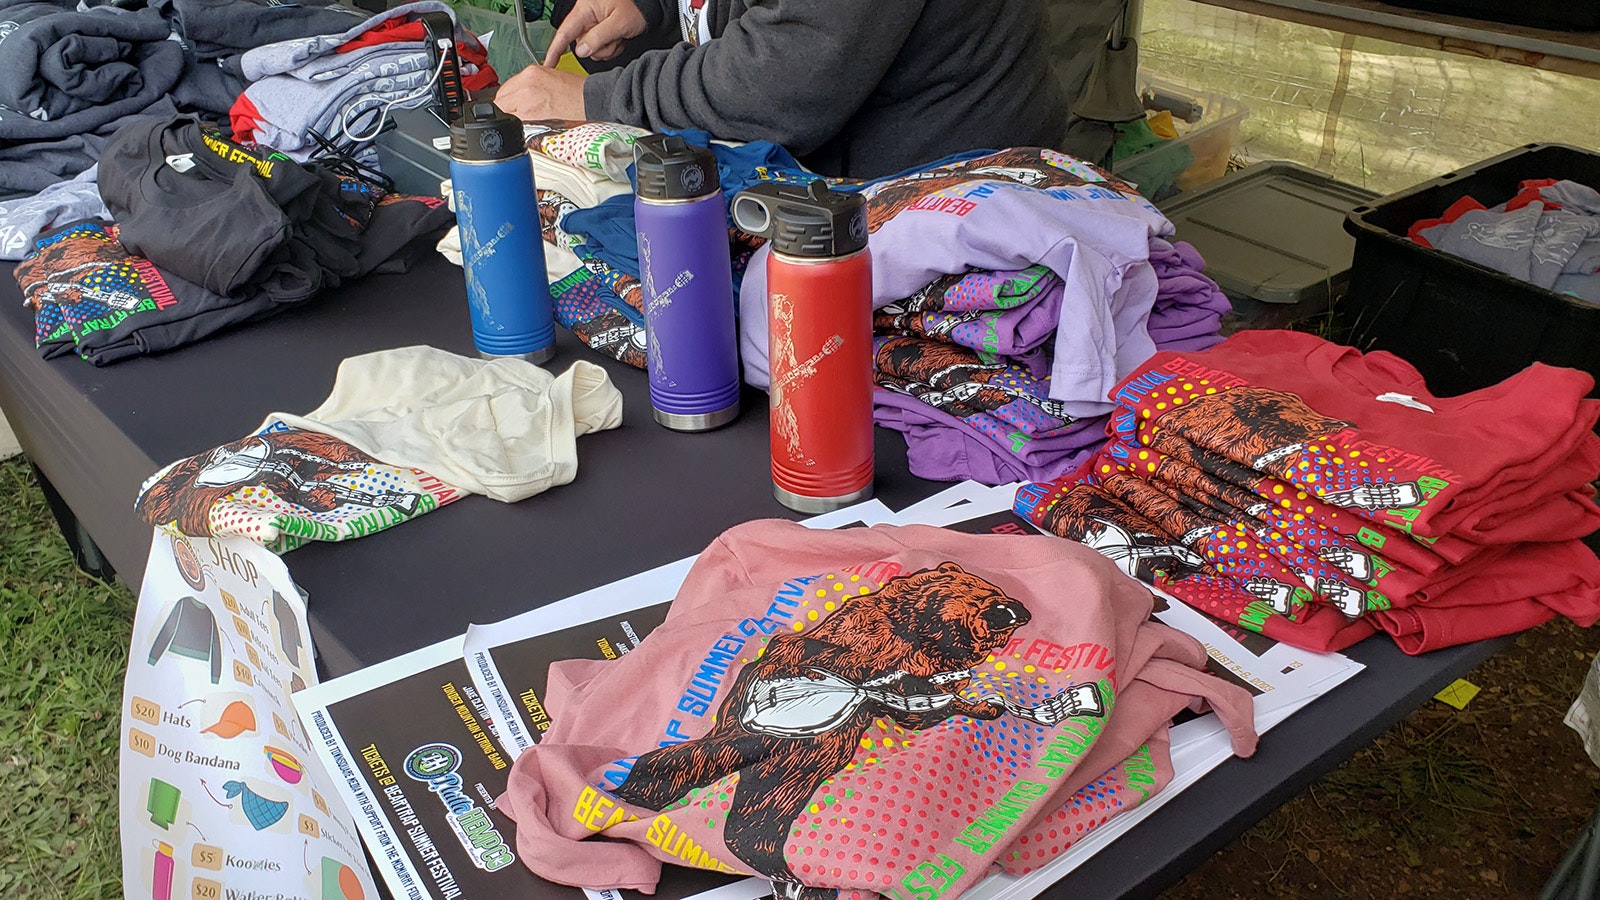 Beartrap Festival merchandise was selling quick on Saturday.